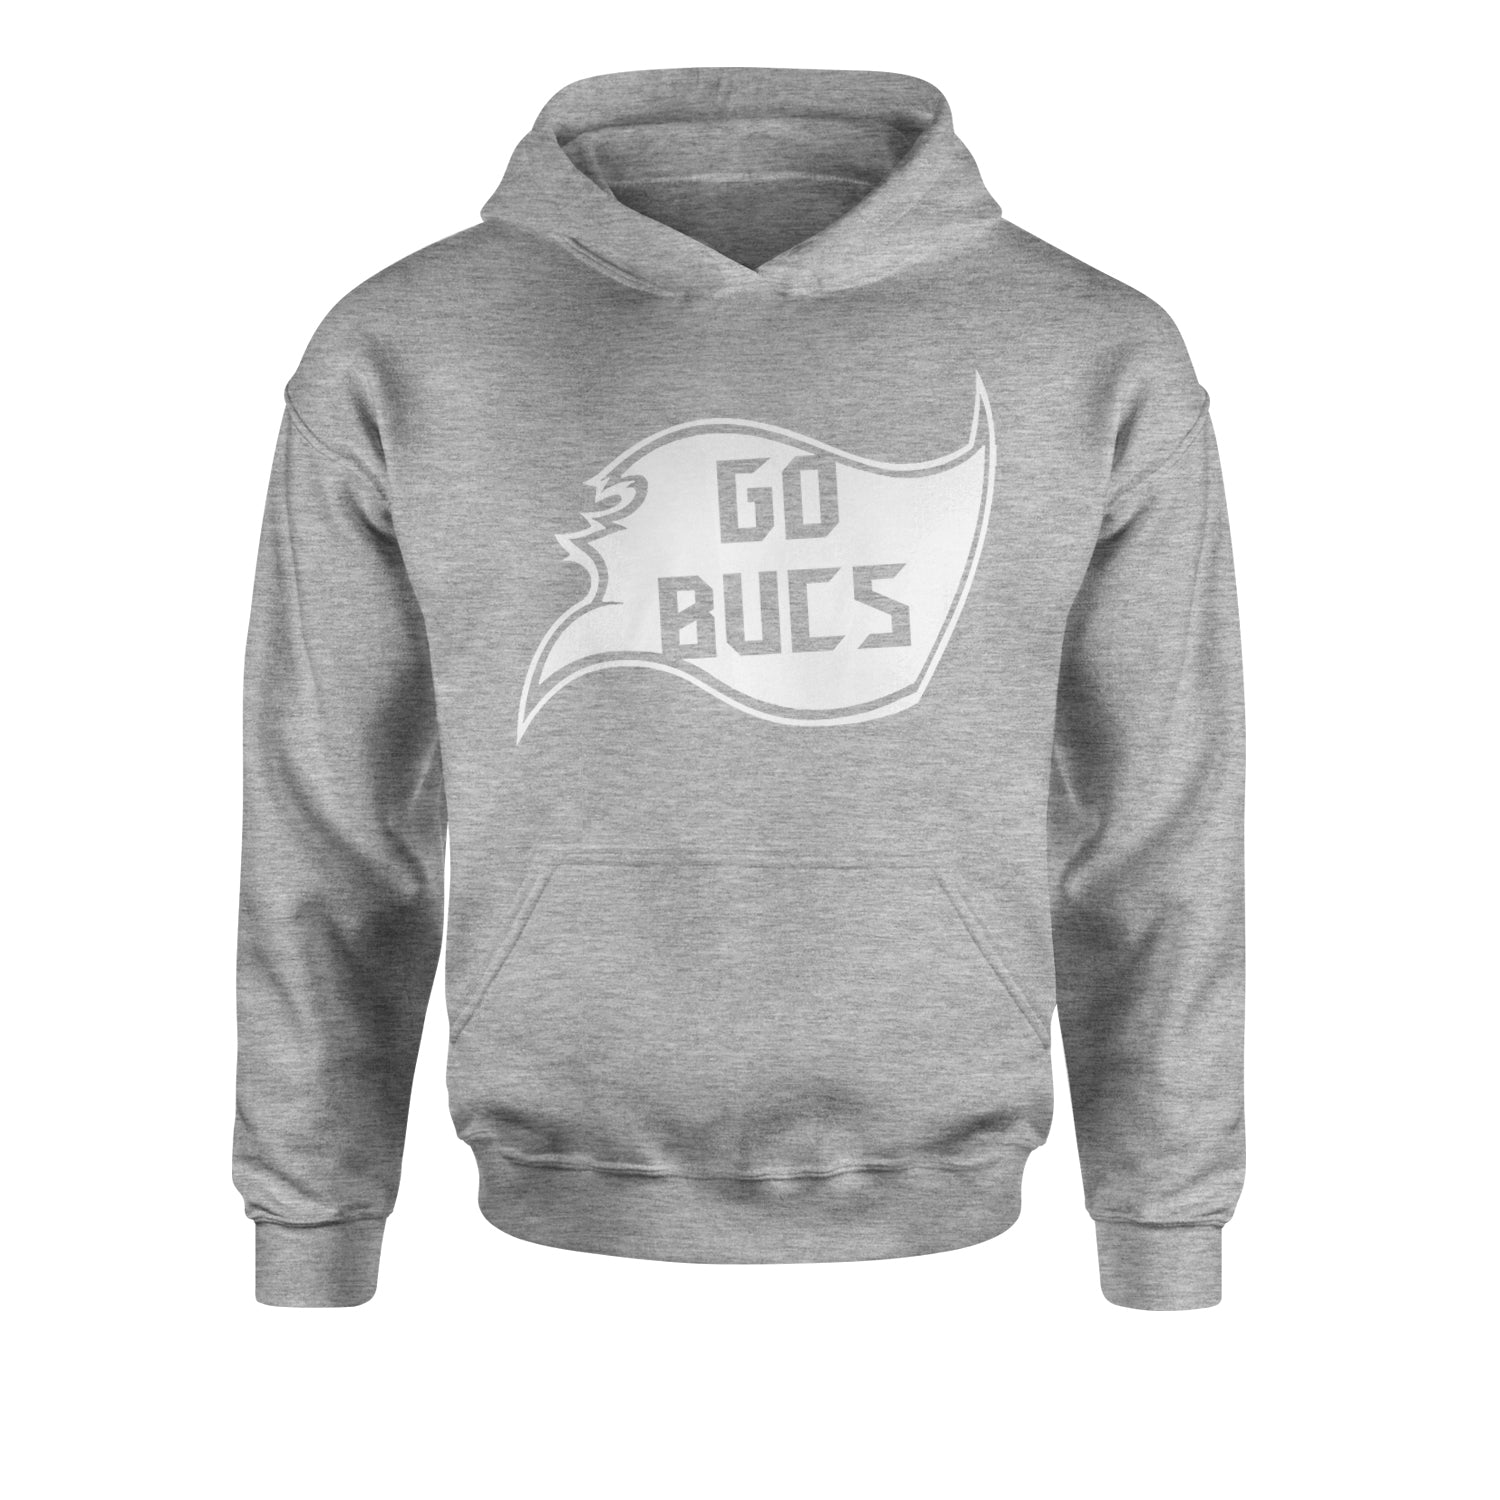 Go Bucs Buccaneers Youth-Sized Hoodie ball, flag, foot, raise, tampa, the by Expression Tees